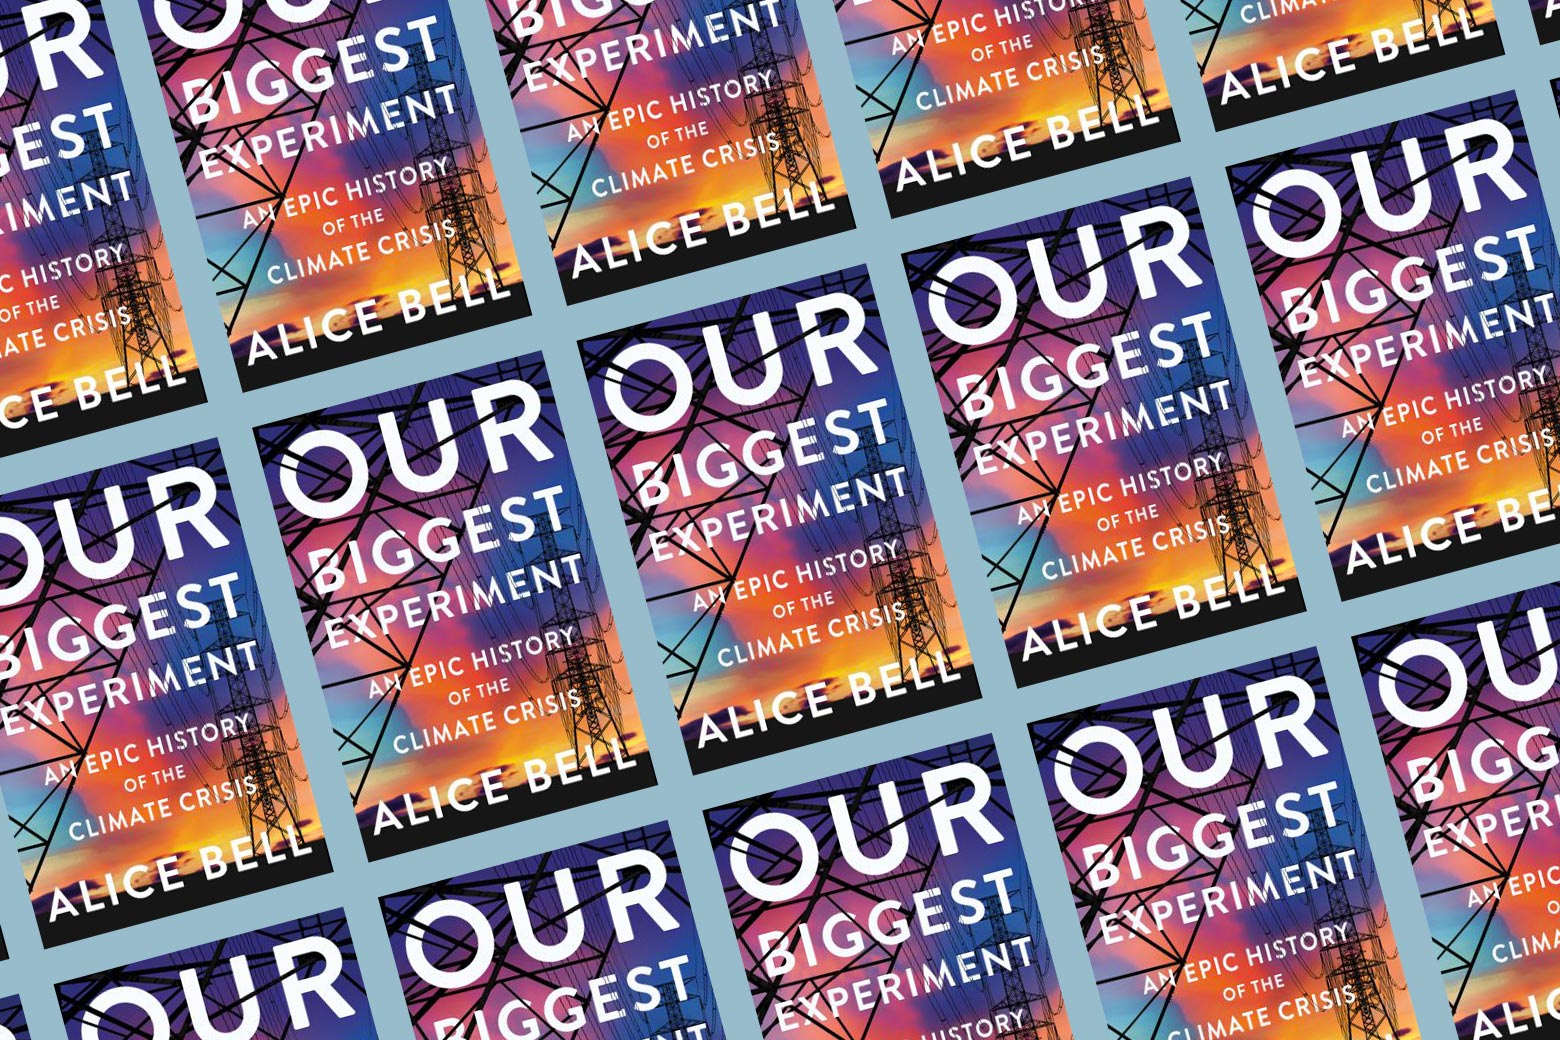 Our Biggest Experiment book cover tiled